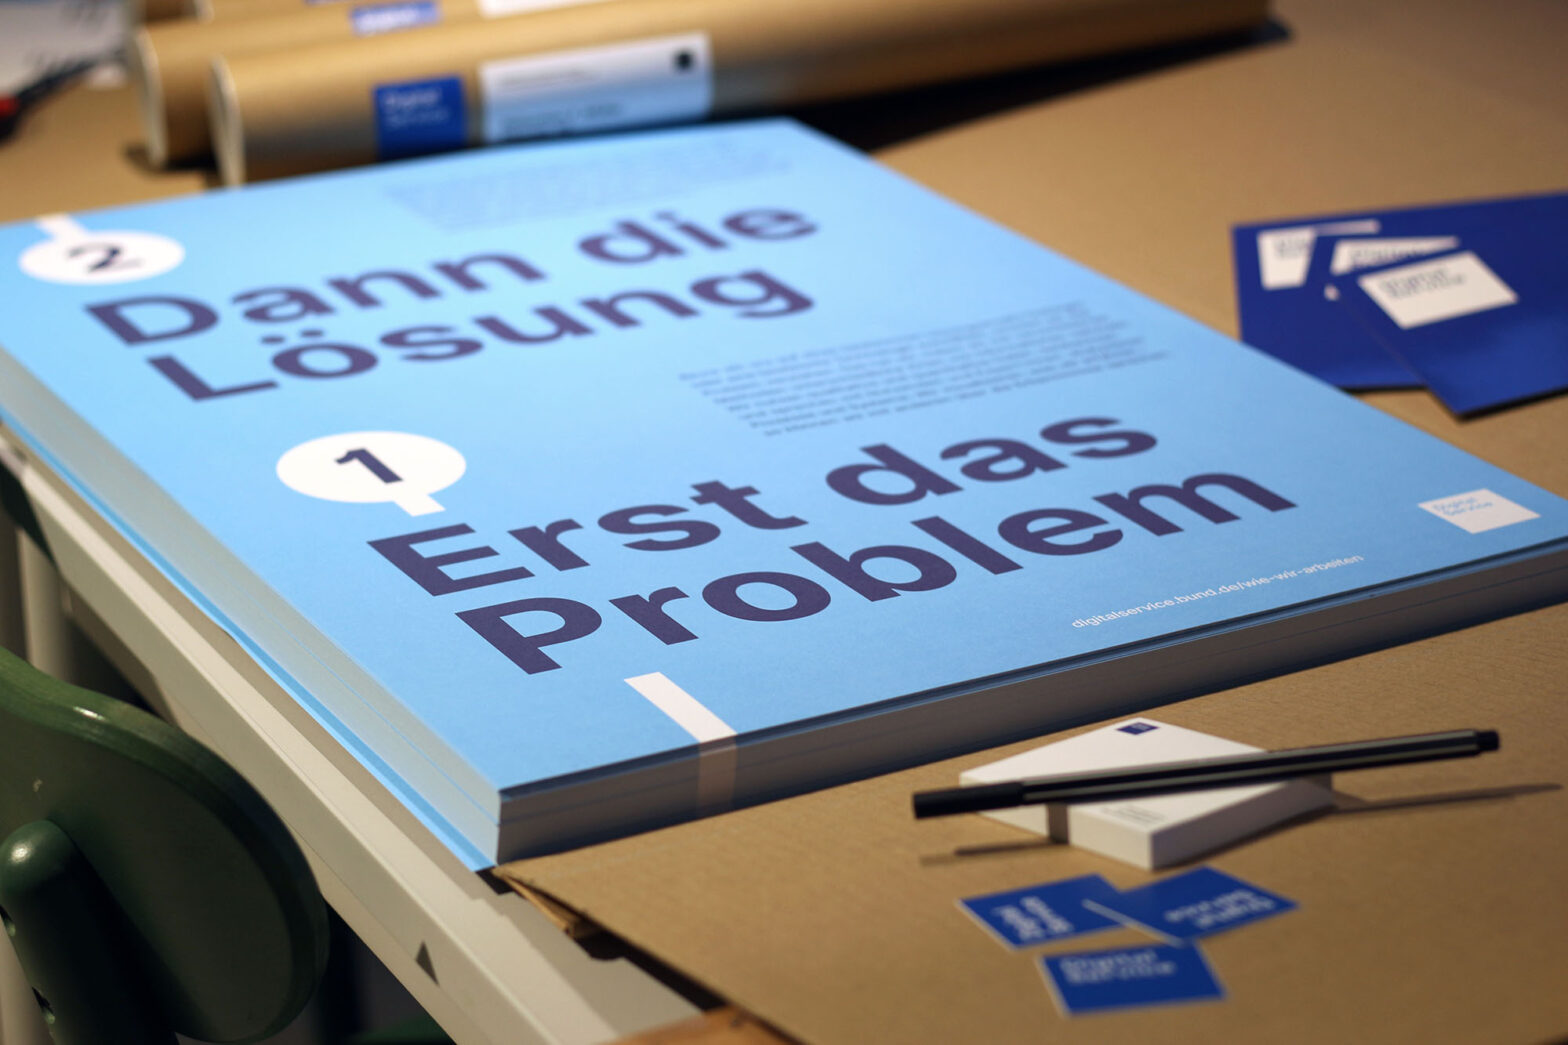 A pile of light blue posters surrounded by mailing tubes, stickers, post-it pads and blue cards all carrying the square logo of the Digital Service; the poster says in German: “Solution second, problem first”